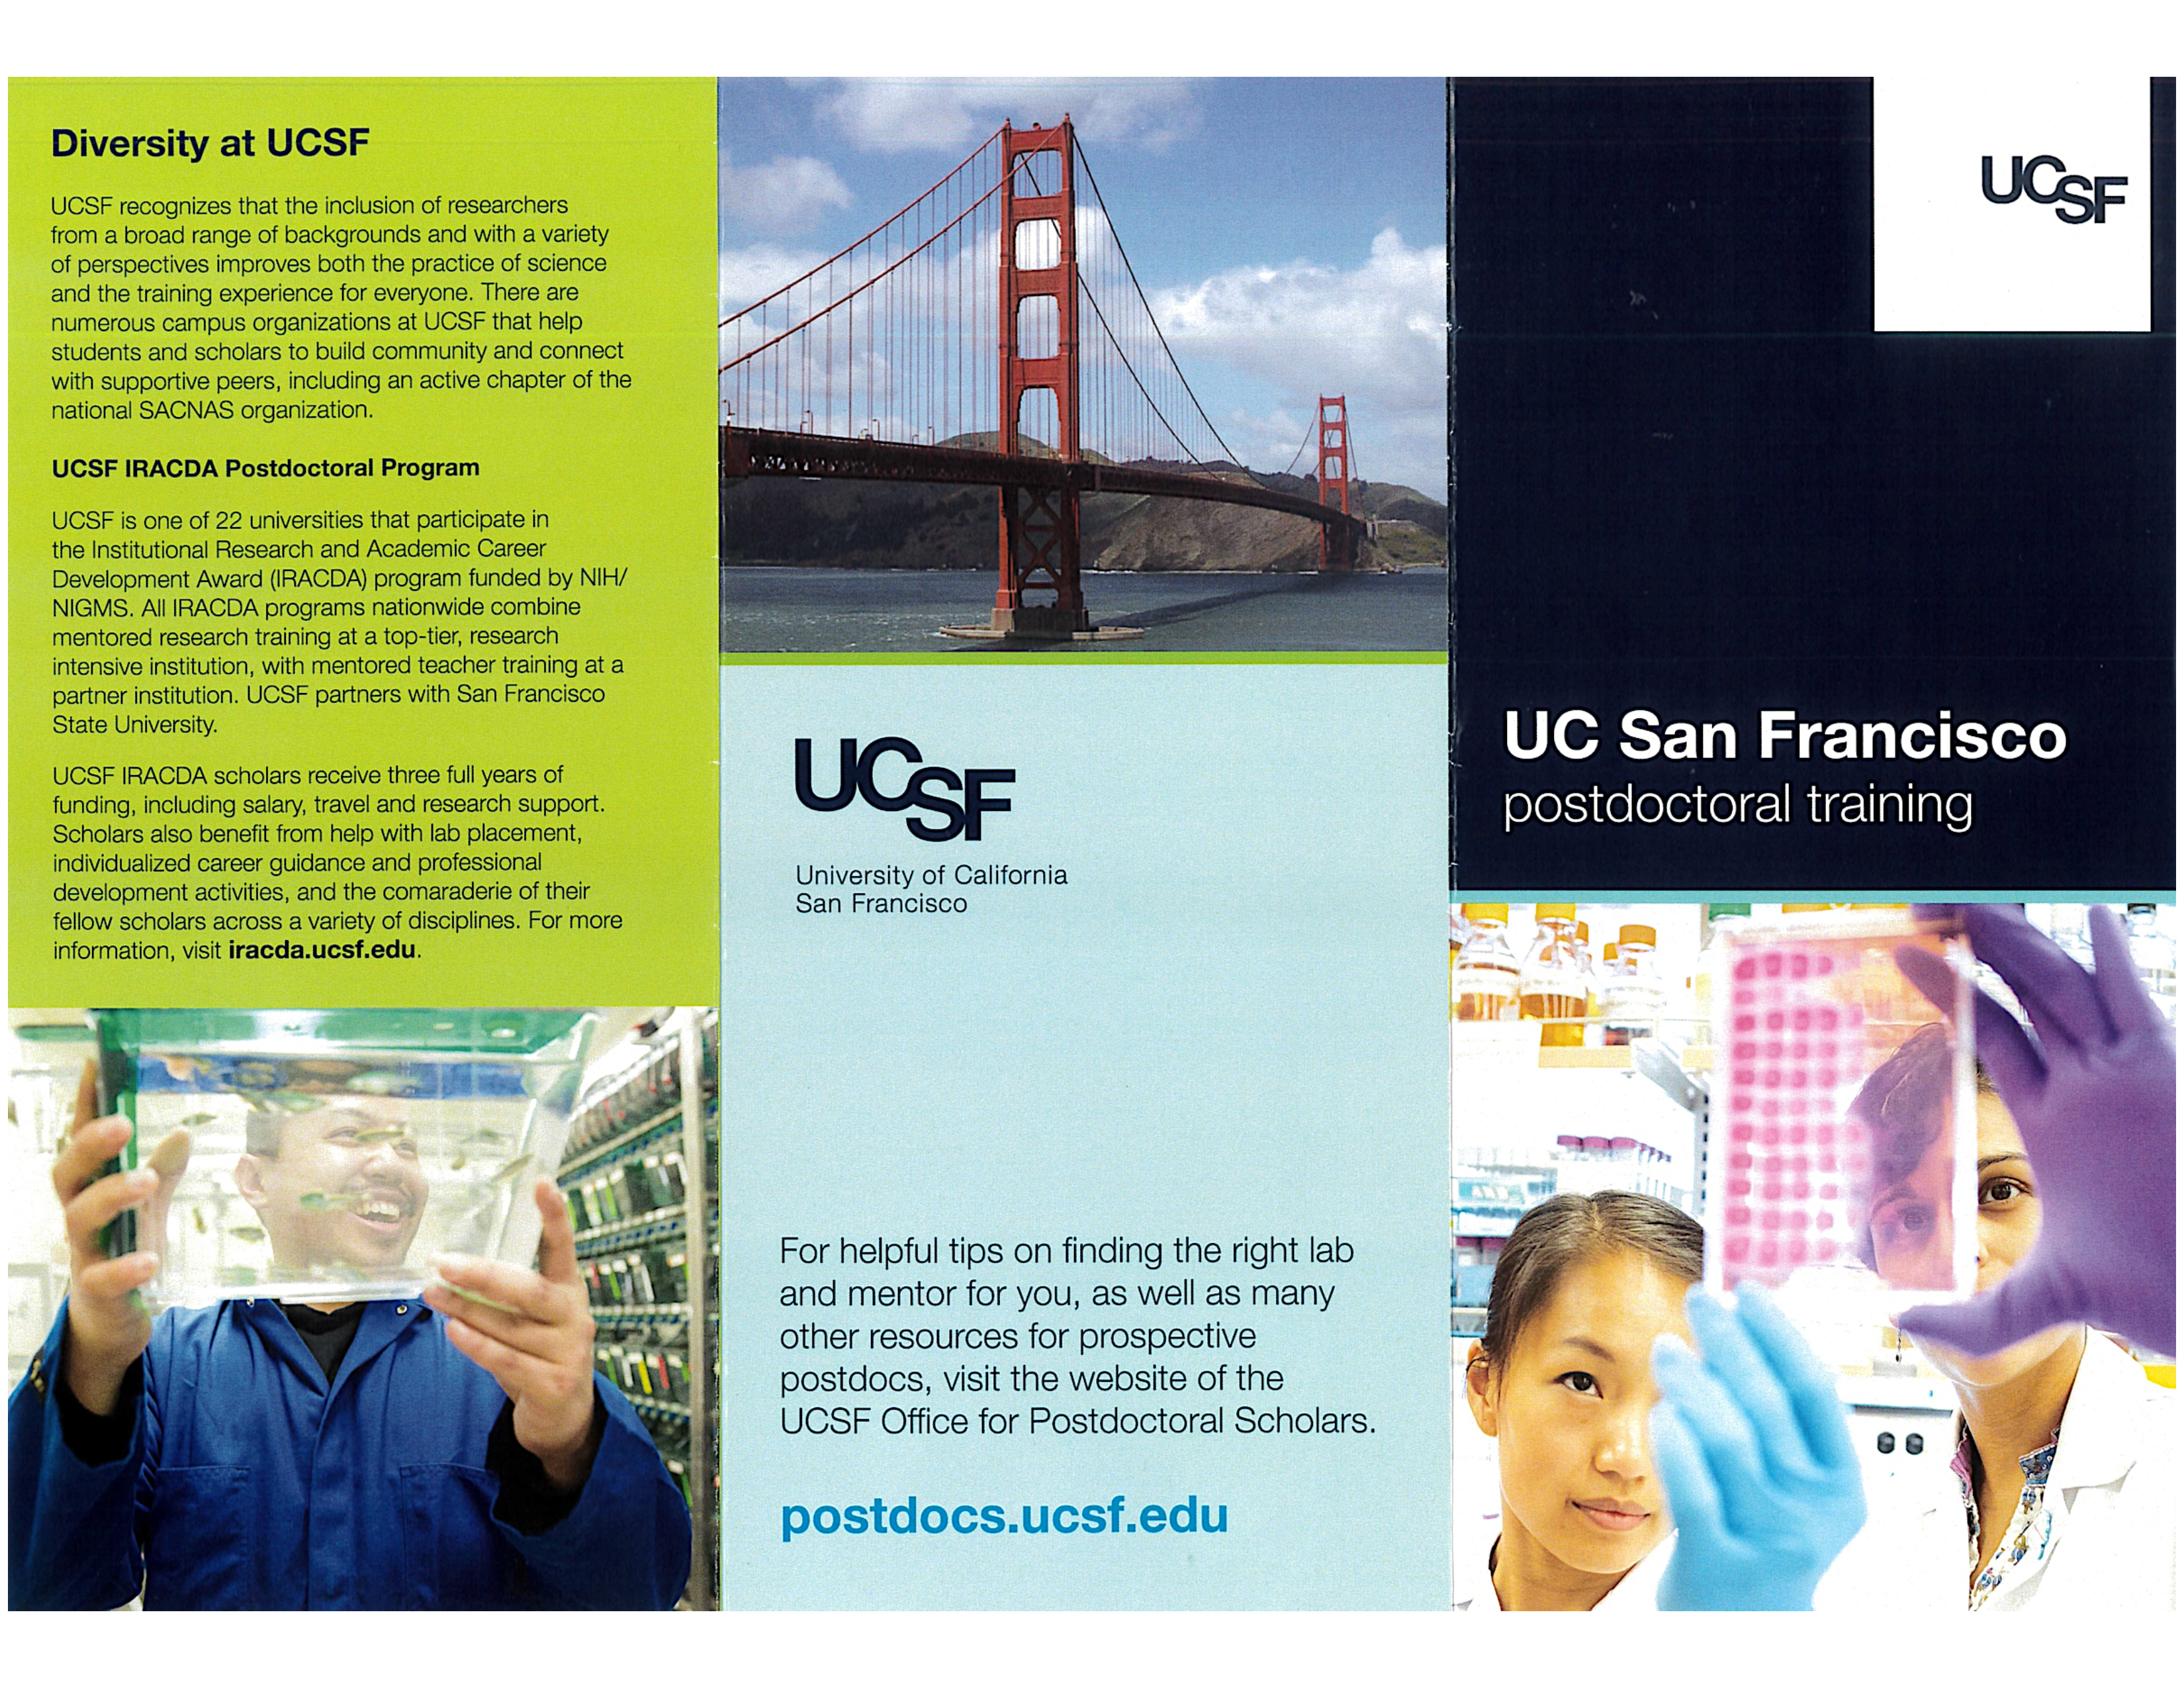 ucsf_postdoctoral_training_flyer.png